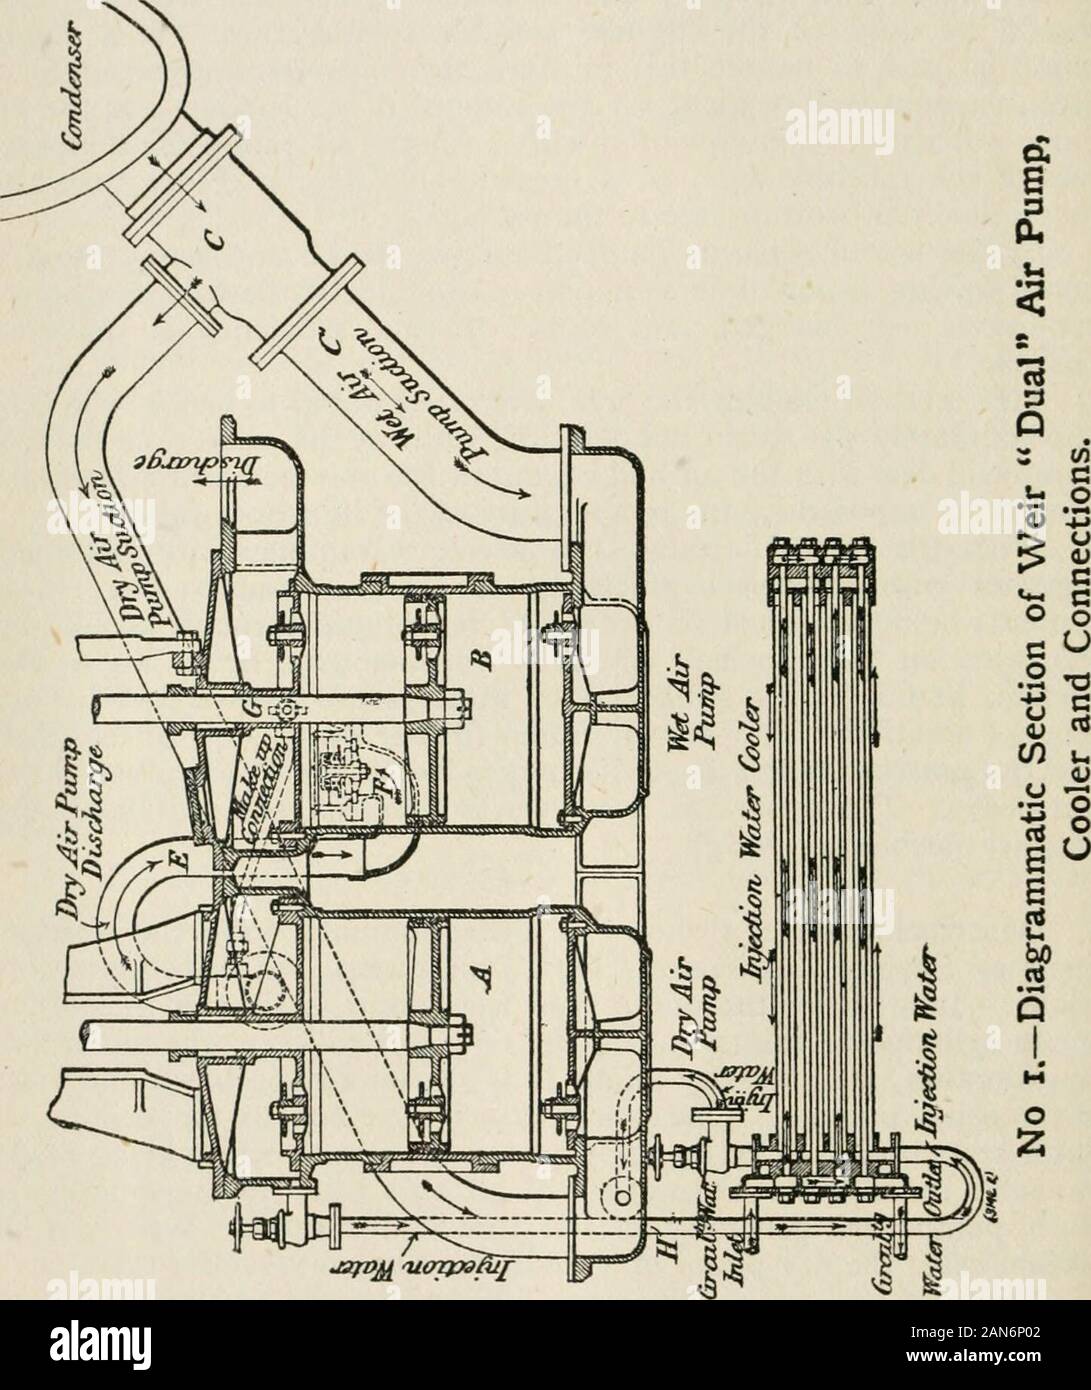 'Verbal' notes and sketches for marine engineers : a manual of marine engineering practice, intended for the use of naval and mercantile engineer officers of all grades, and students, and is specially compiled for the use of engineer officers preparing for examinations of competency at home or abroad . uch a manner that the water will all pass by C to the wet pump.Both pumps are generally of the three-valve marine type, but incertain cases the dry pump may be of the suction valveless type. The first and most important difference from an ordinary twinpump consists in the dry pump discharging th Stock Photo